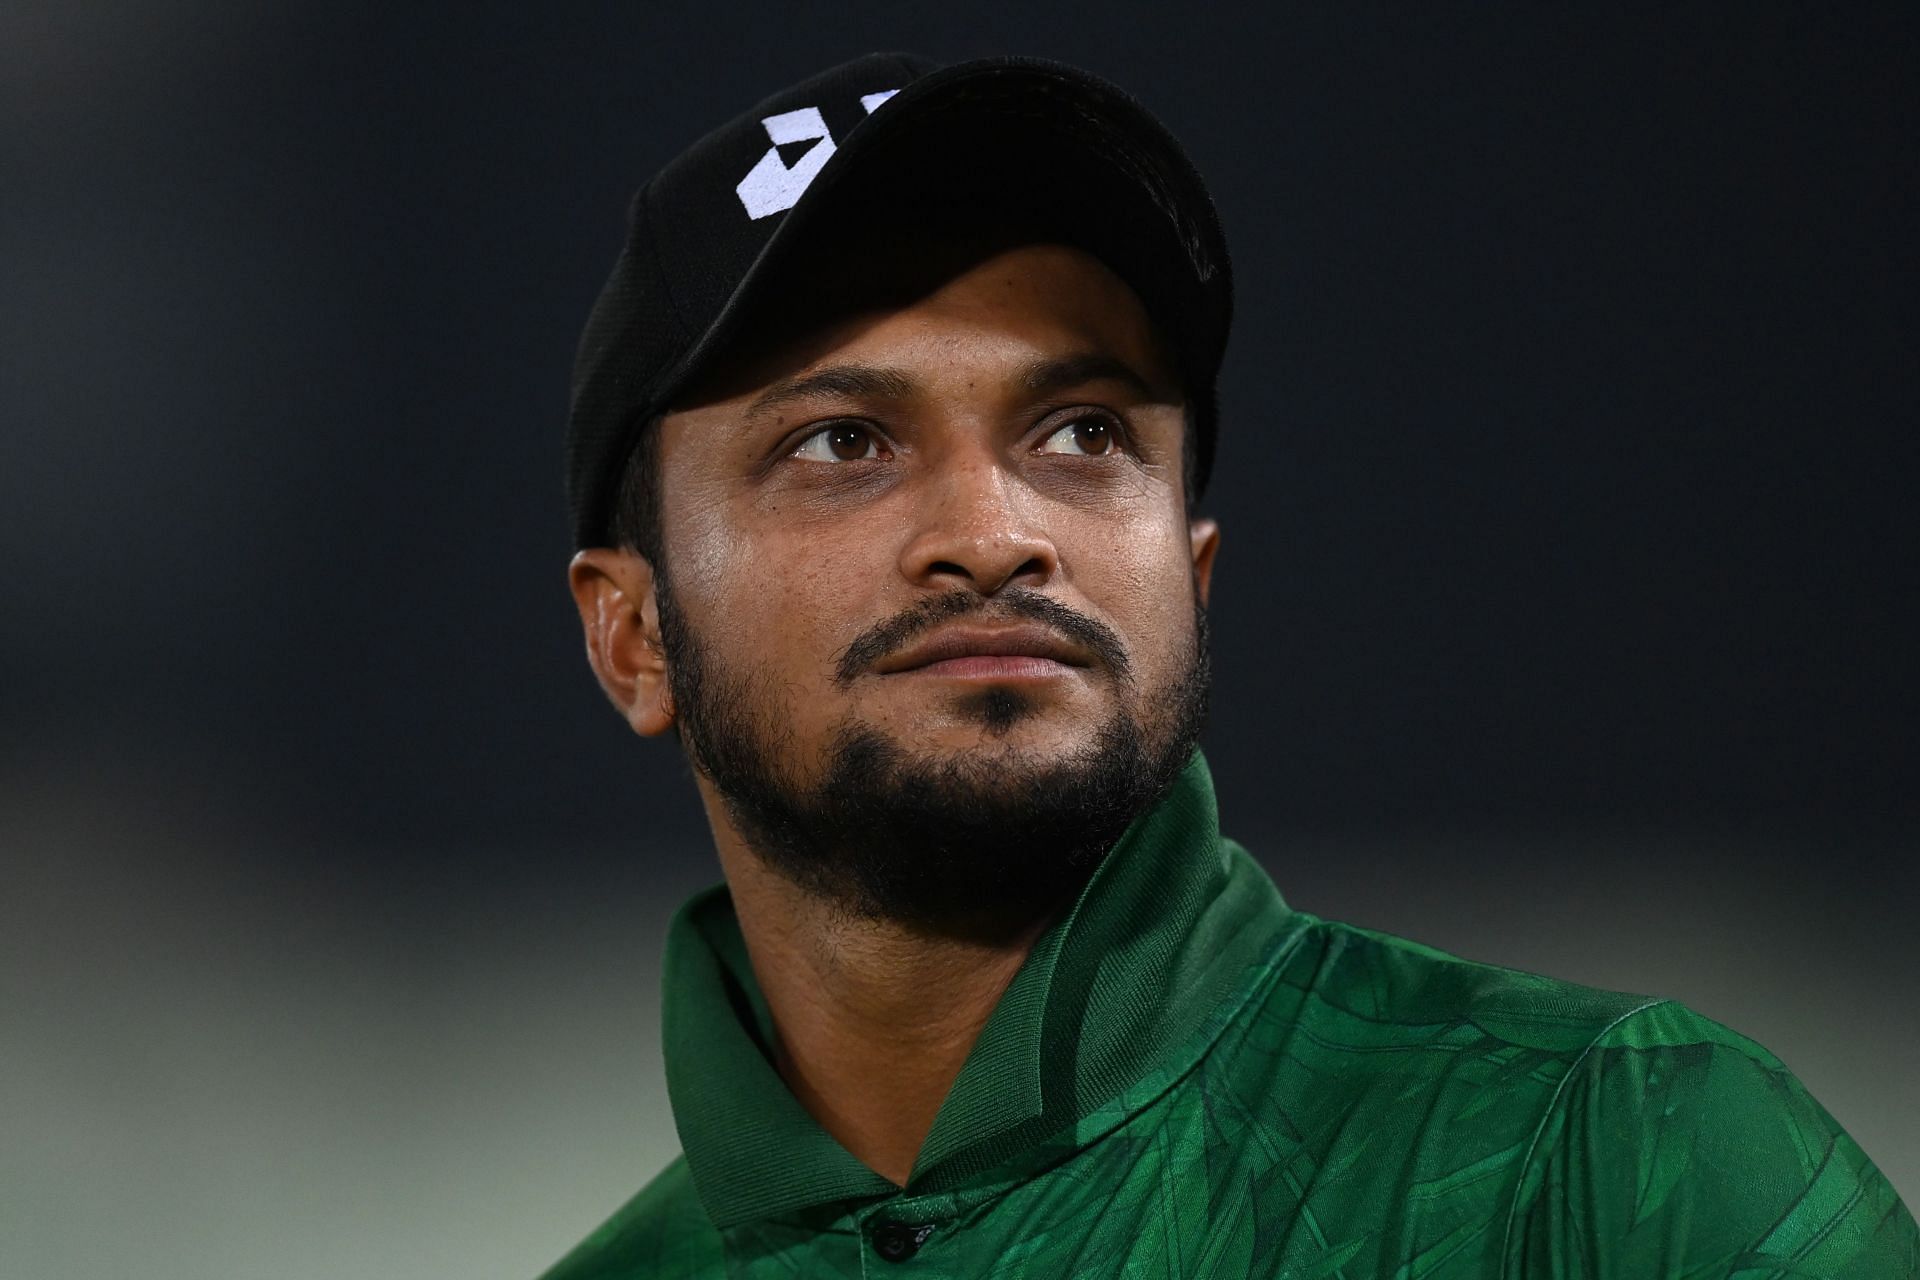 Shakib Al Hasan is one of the best cricketers in Bangladesh